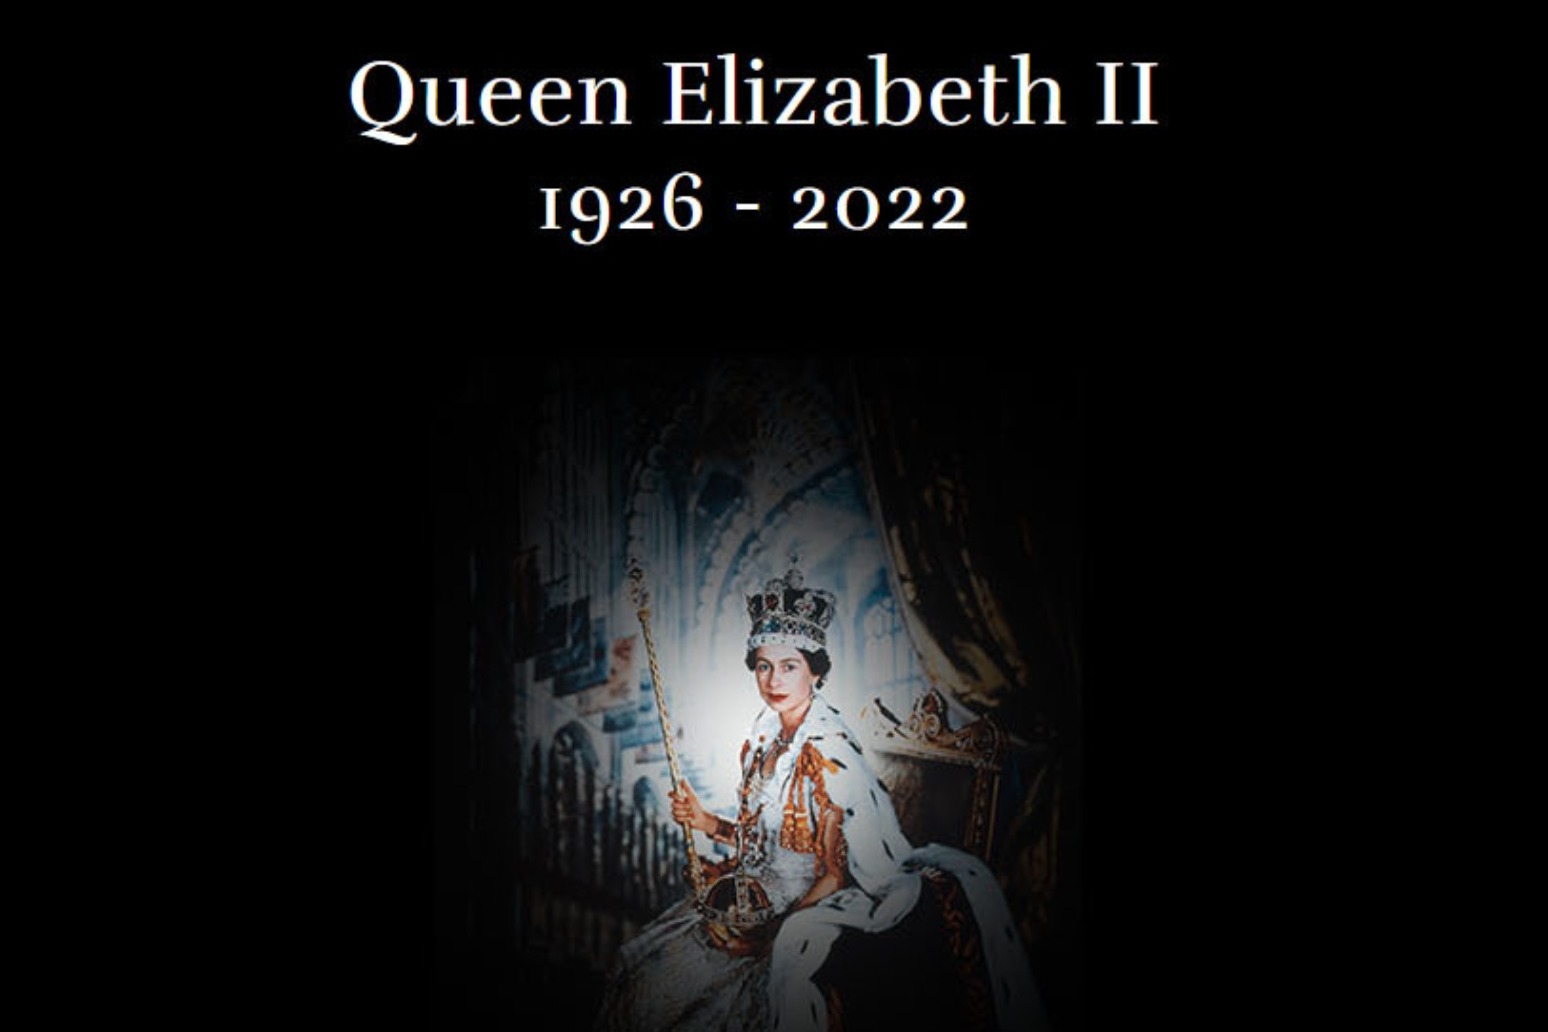 The Queen has died at the age of 96 